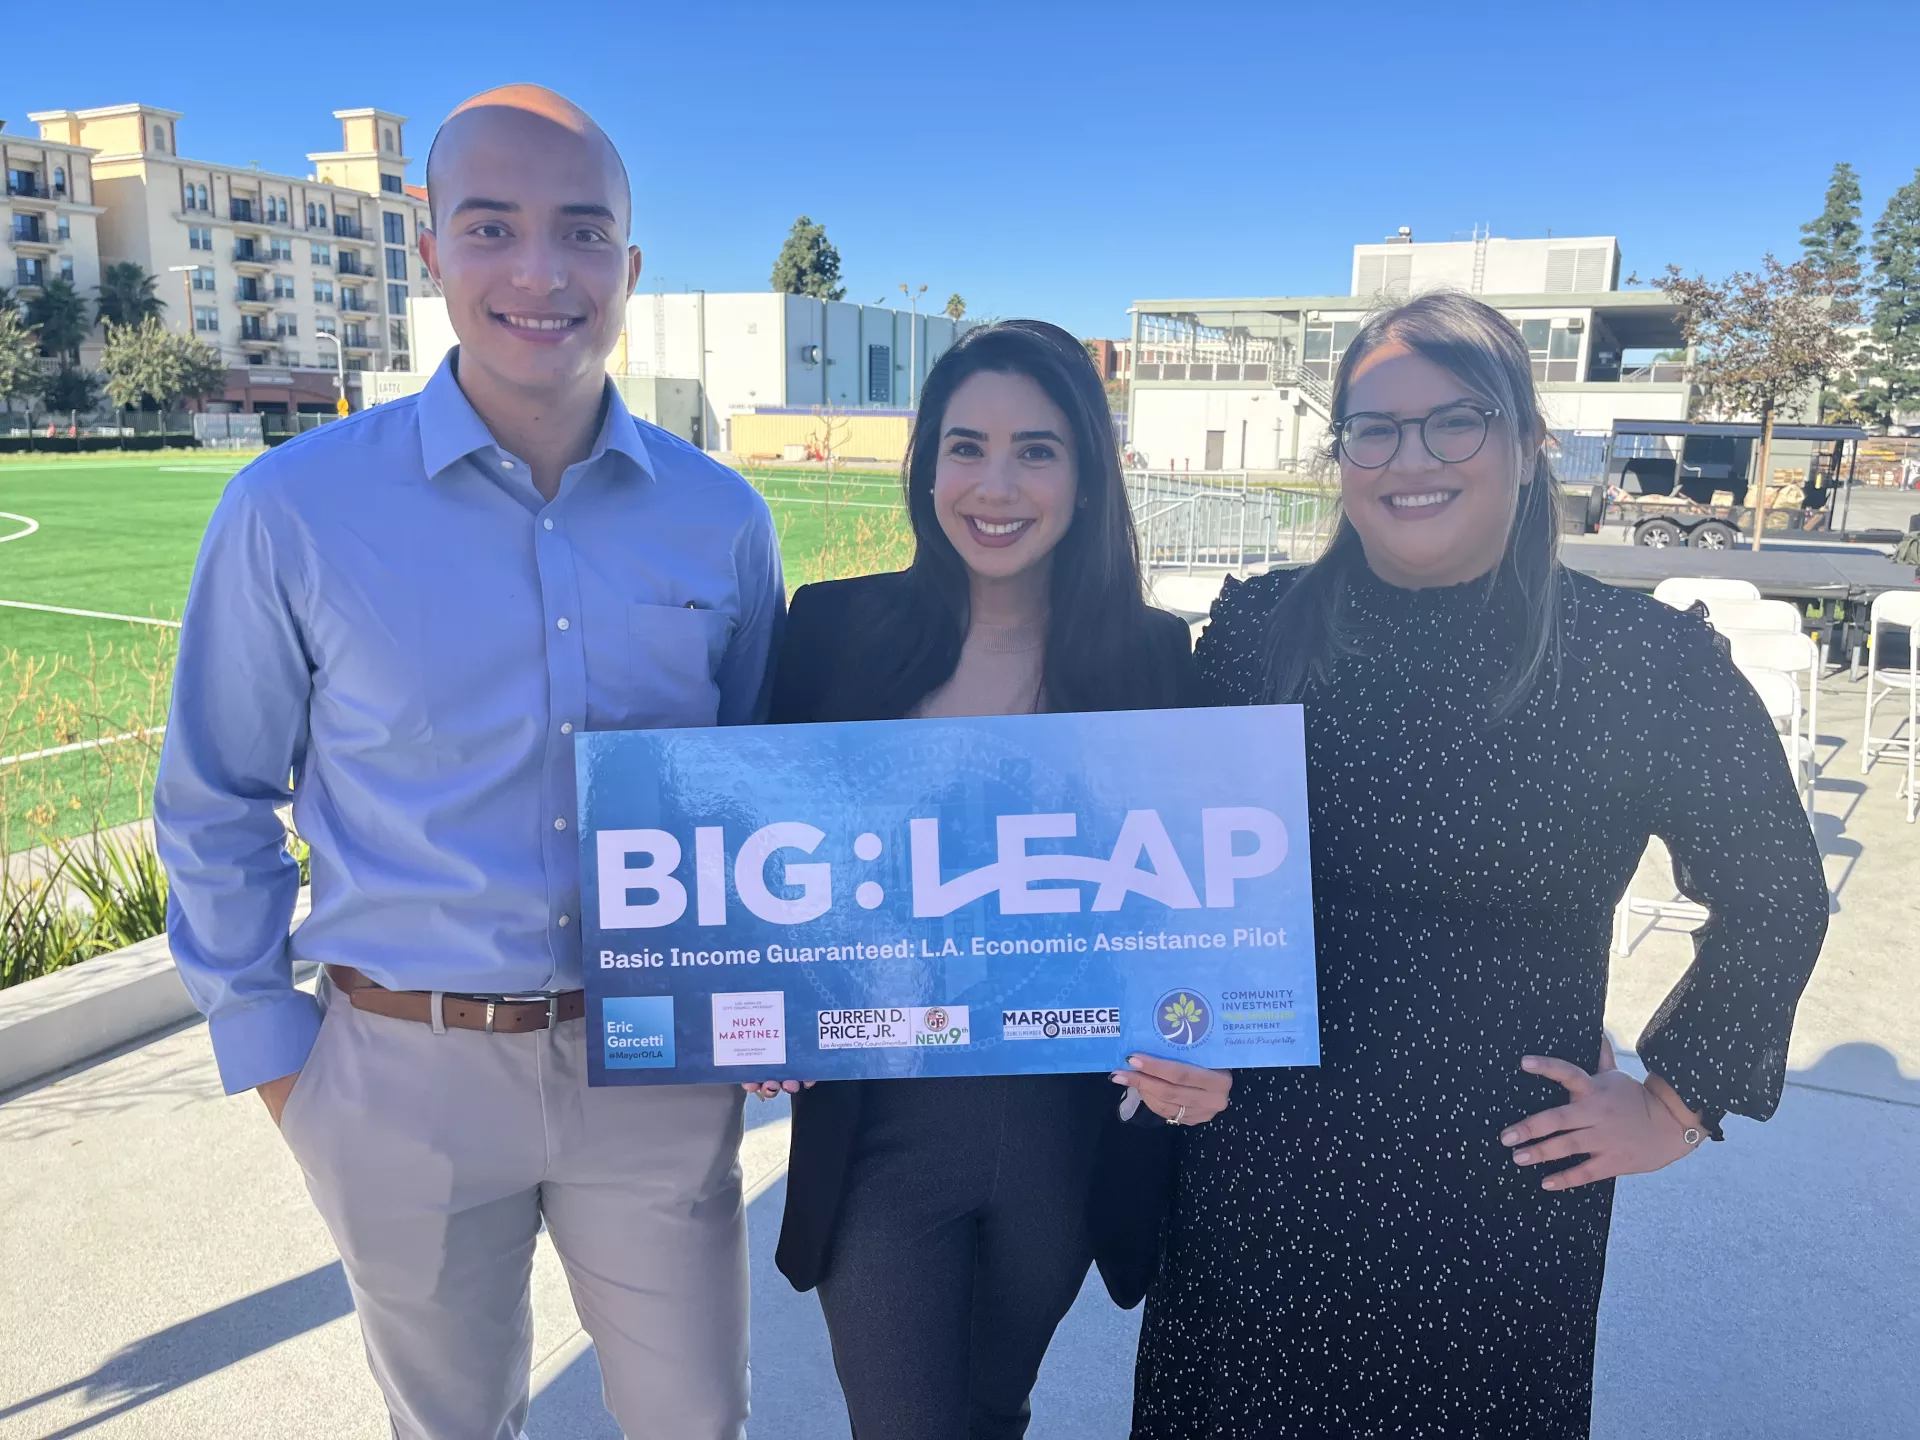 Big Leap Launch with 3 people in the photo and one person is holding the Big Leap sign